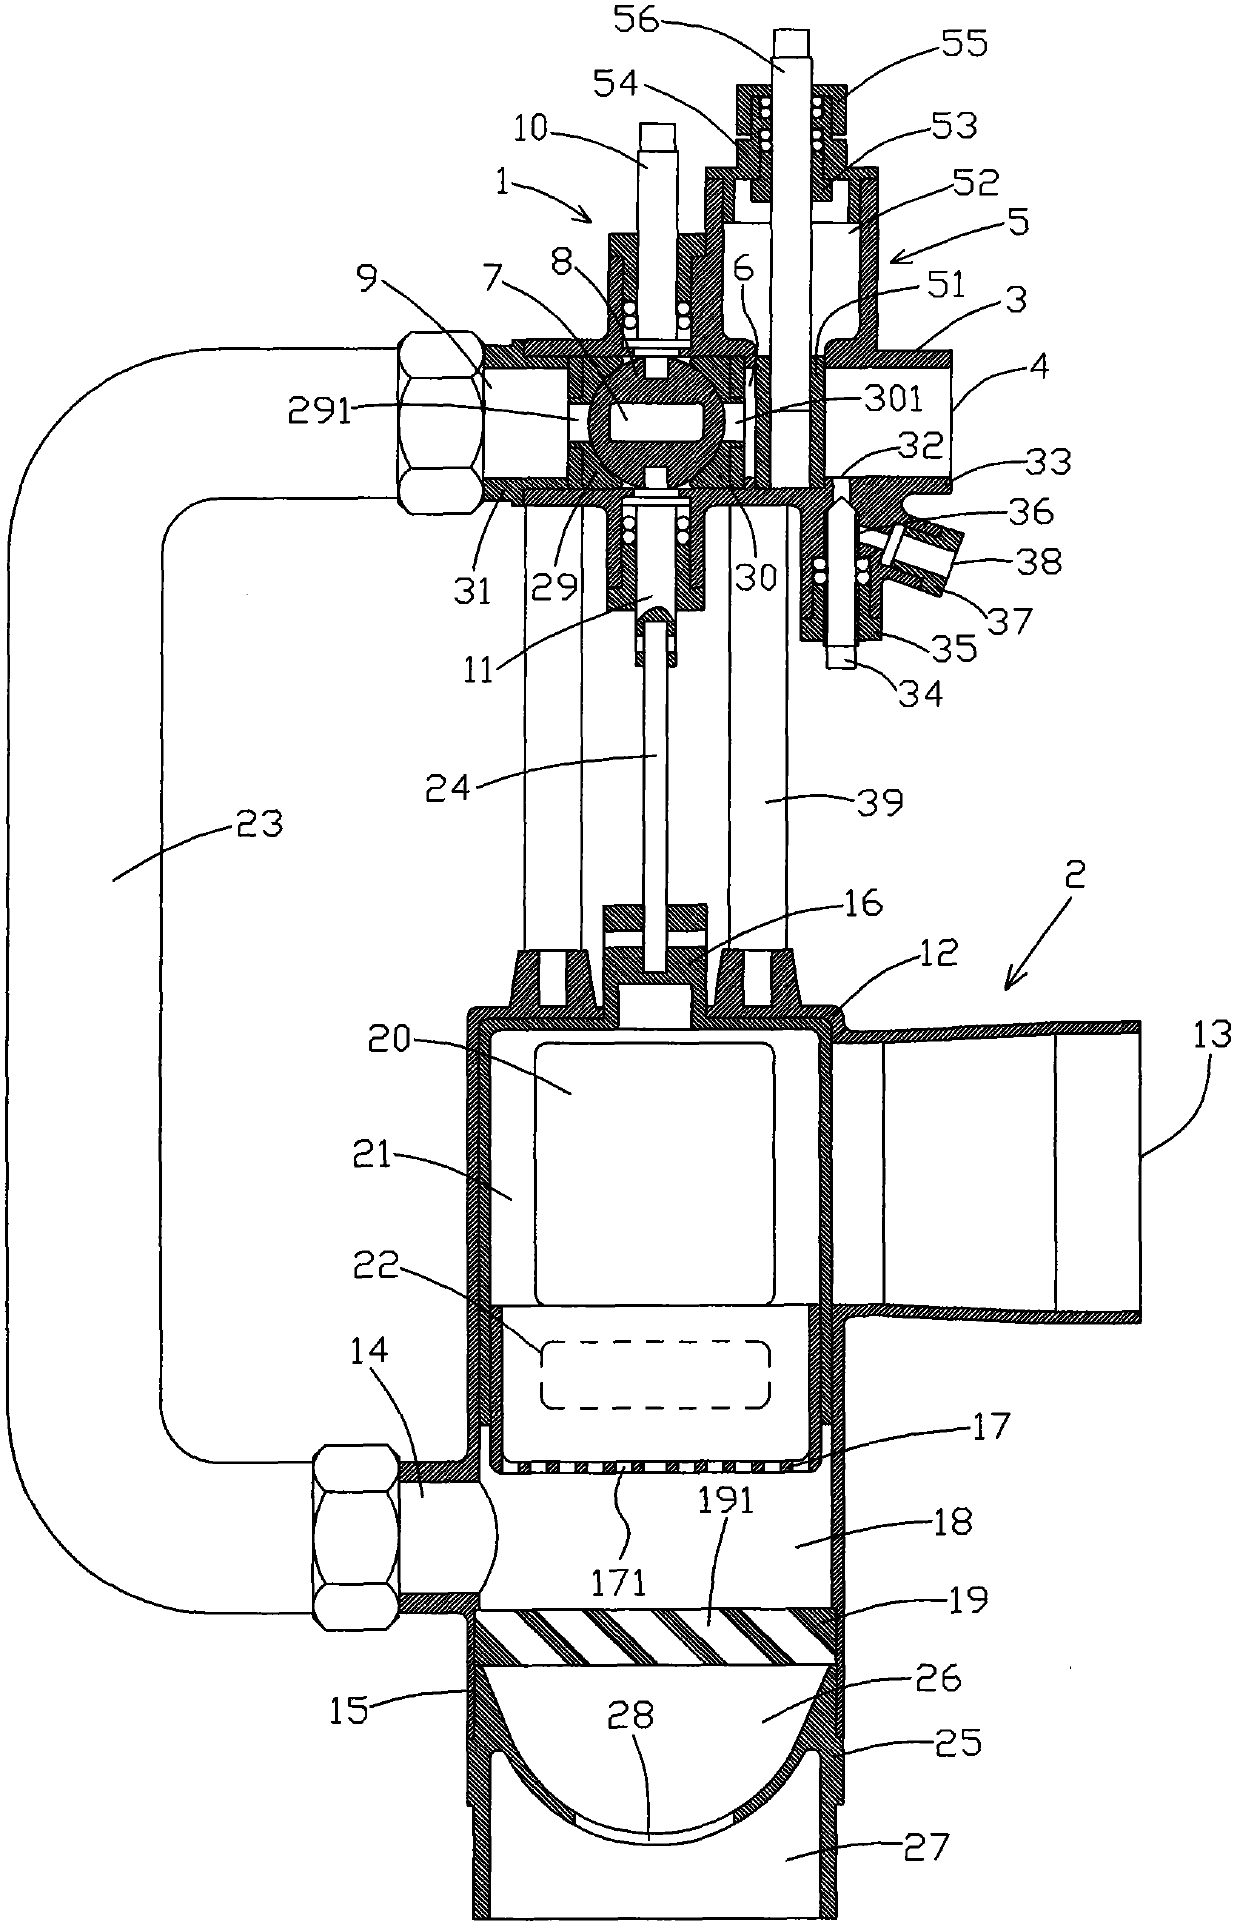 Air-gas linkage ratio adjustment and control system of combustor in commercial kitchen equipment